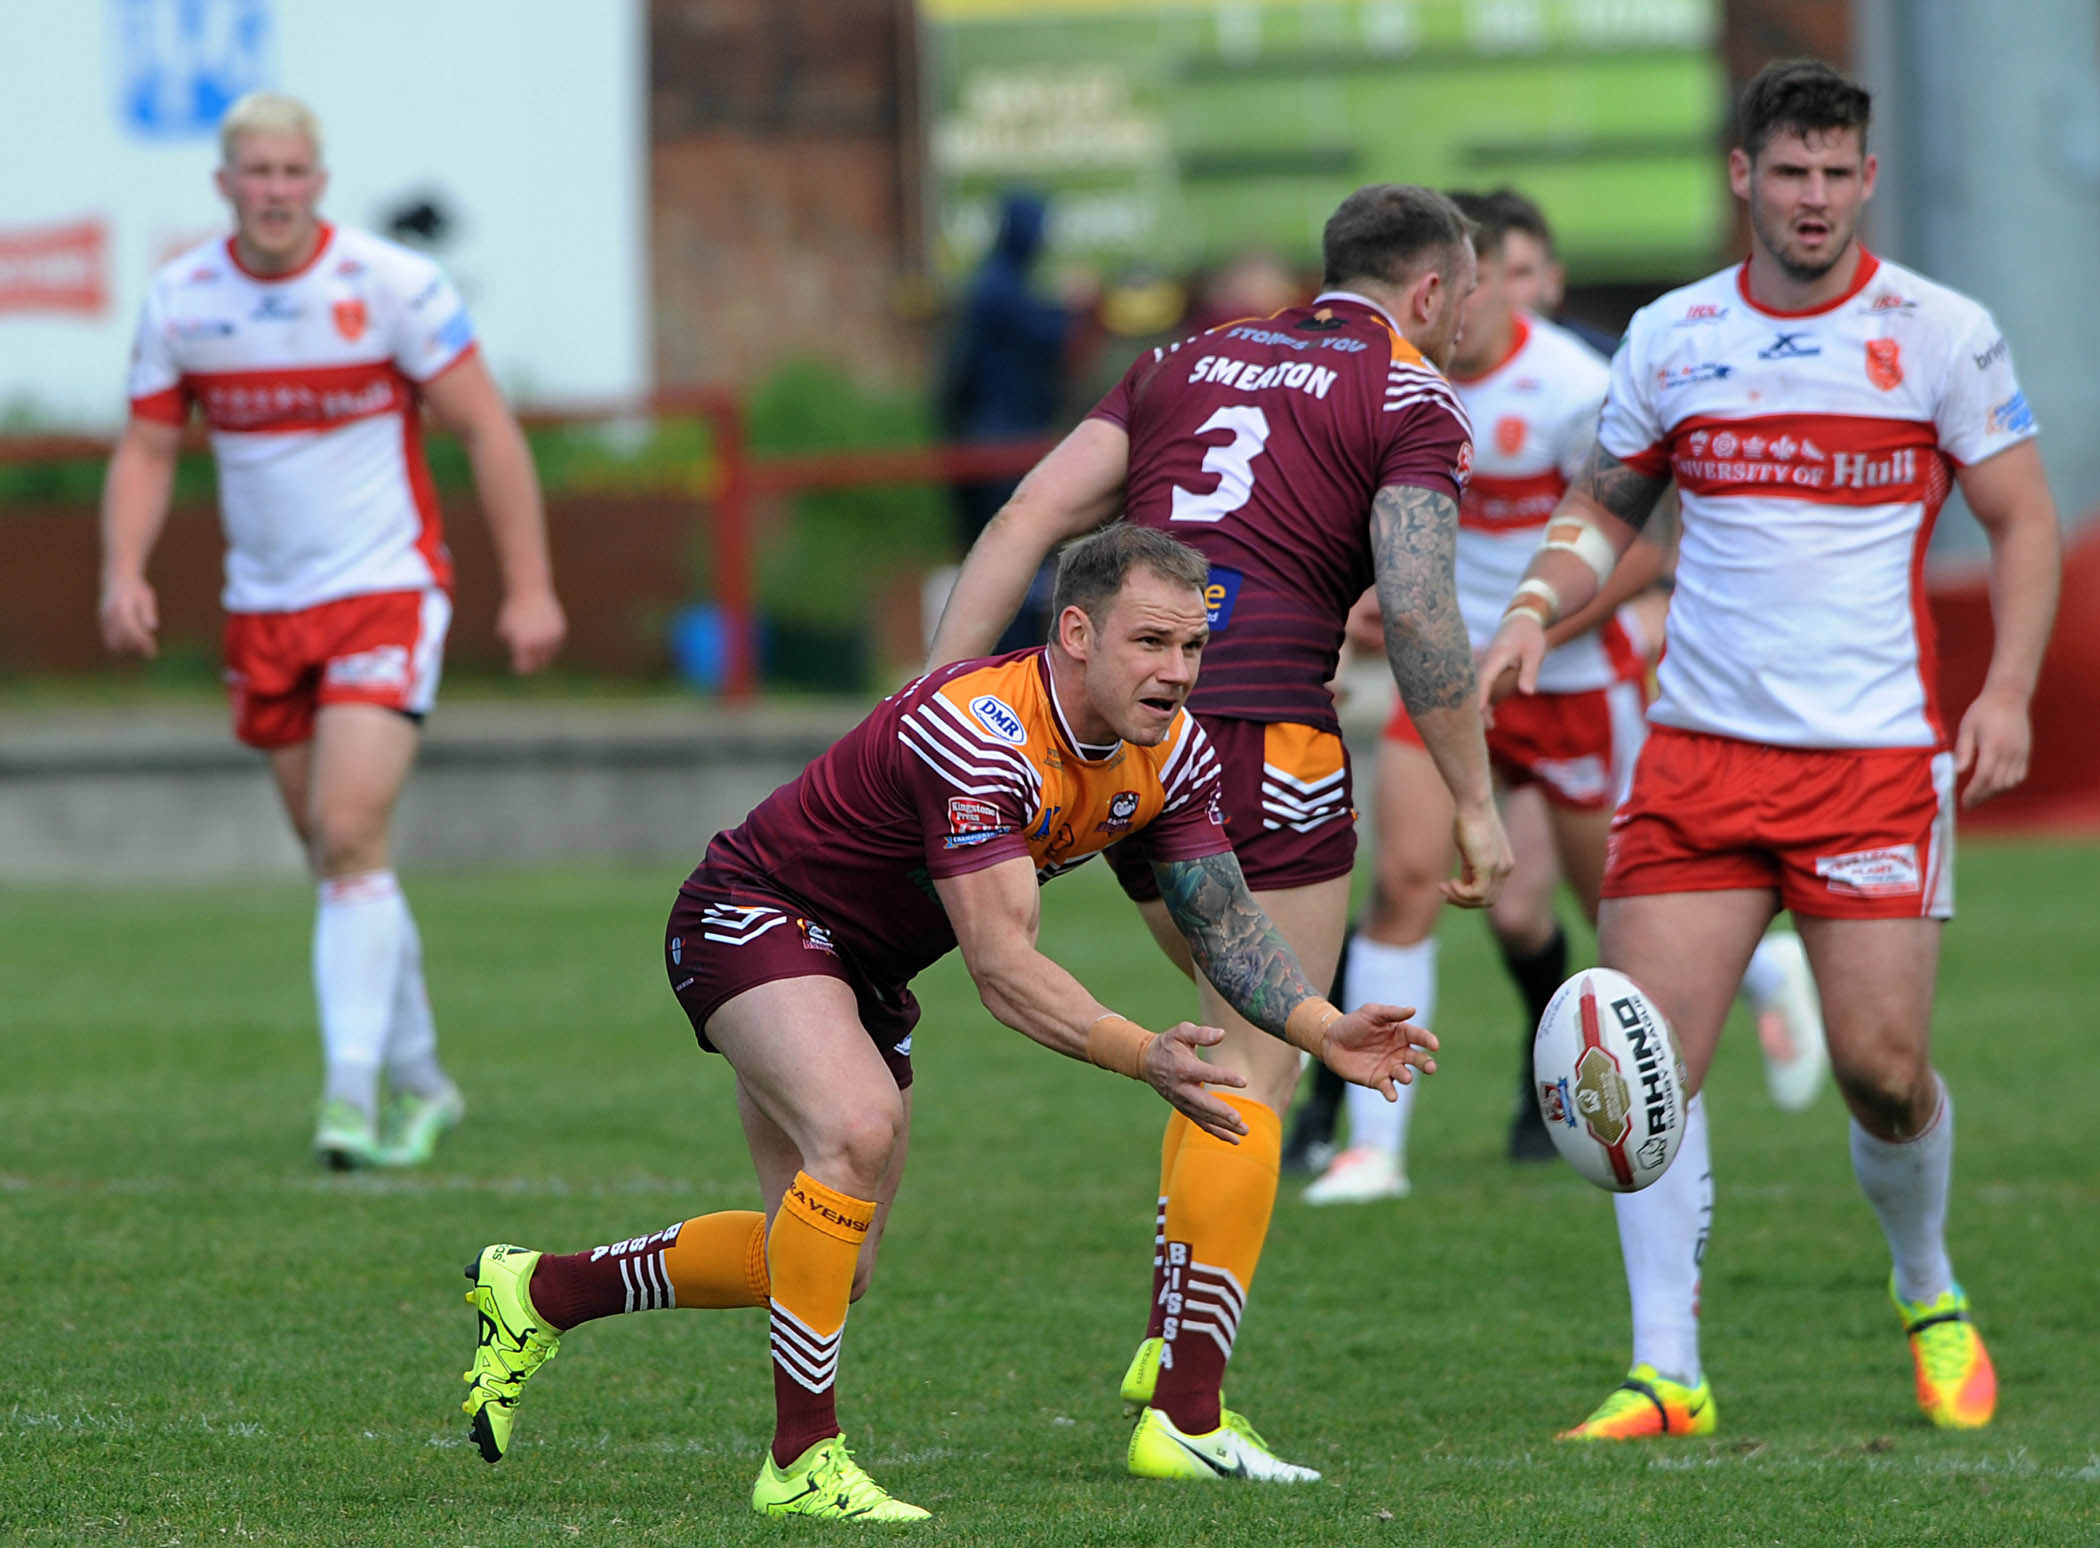 Championship round-up: Batley upset Toulouse, London bounce back, Hall on fire